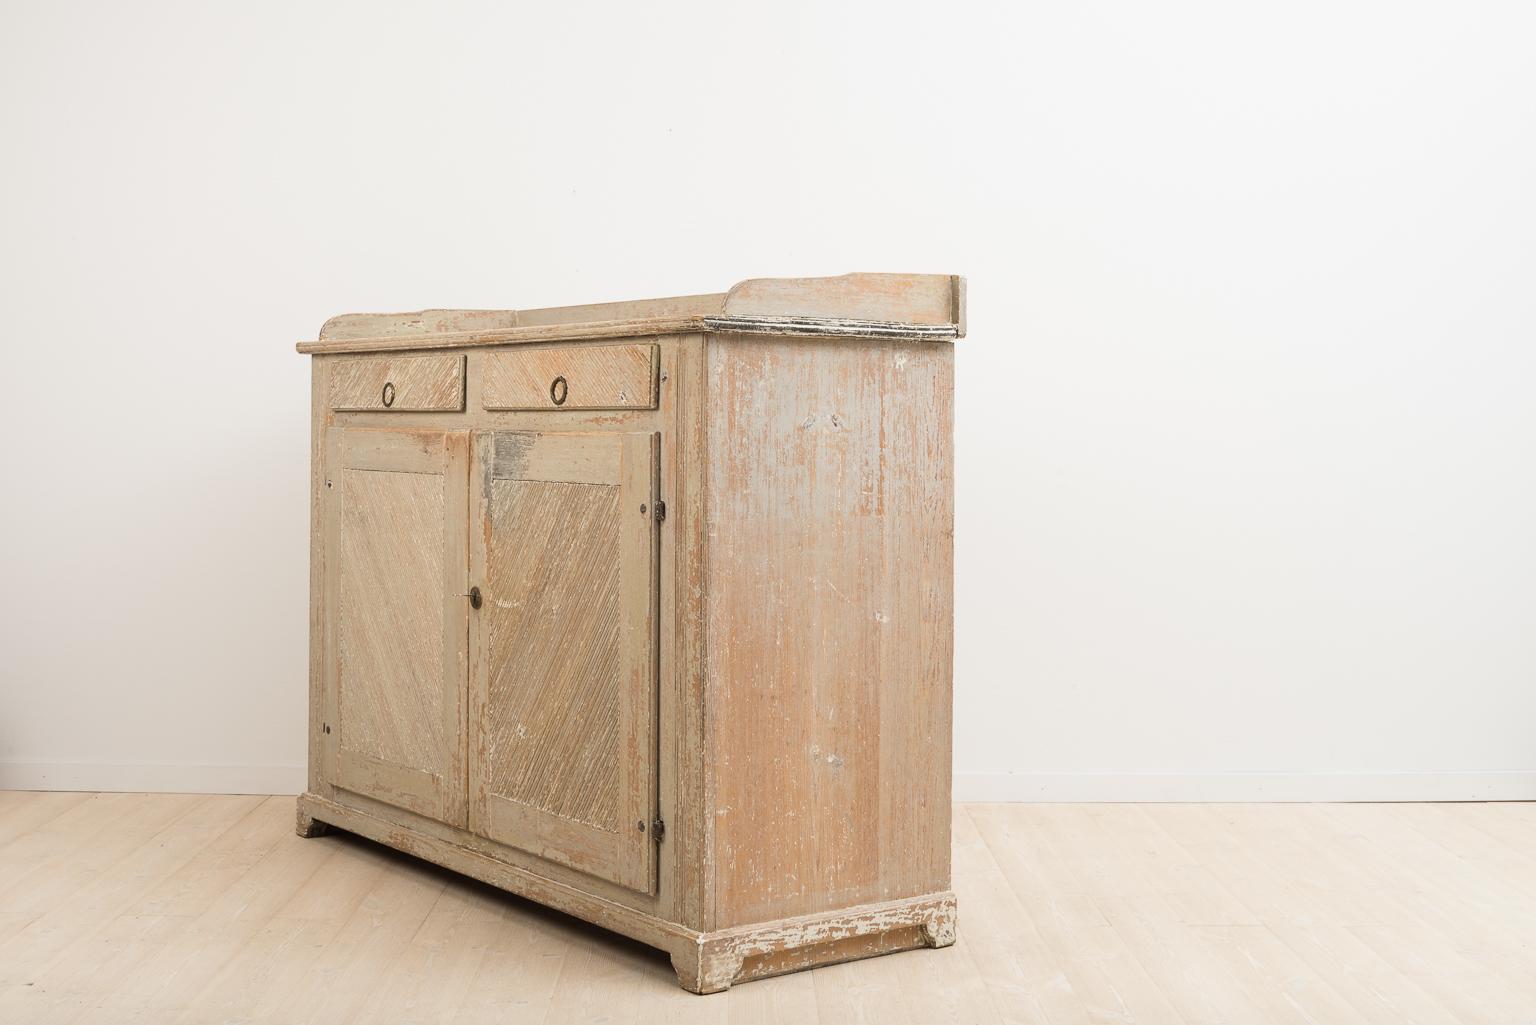 Hand-Painted Late 18th Century Swedish Gustavian Sideboard in Original Condition